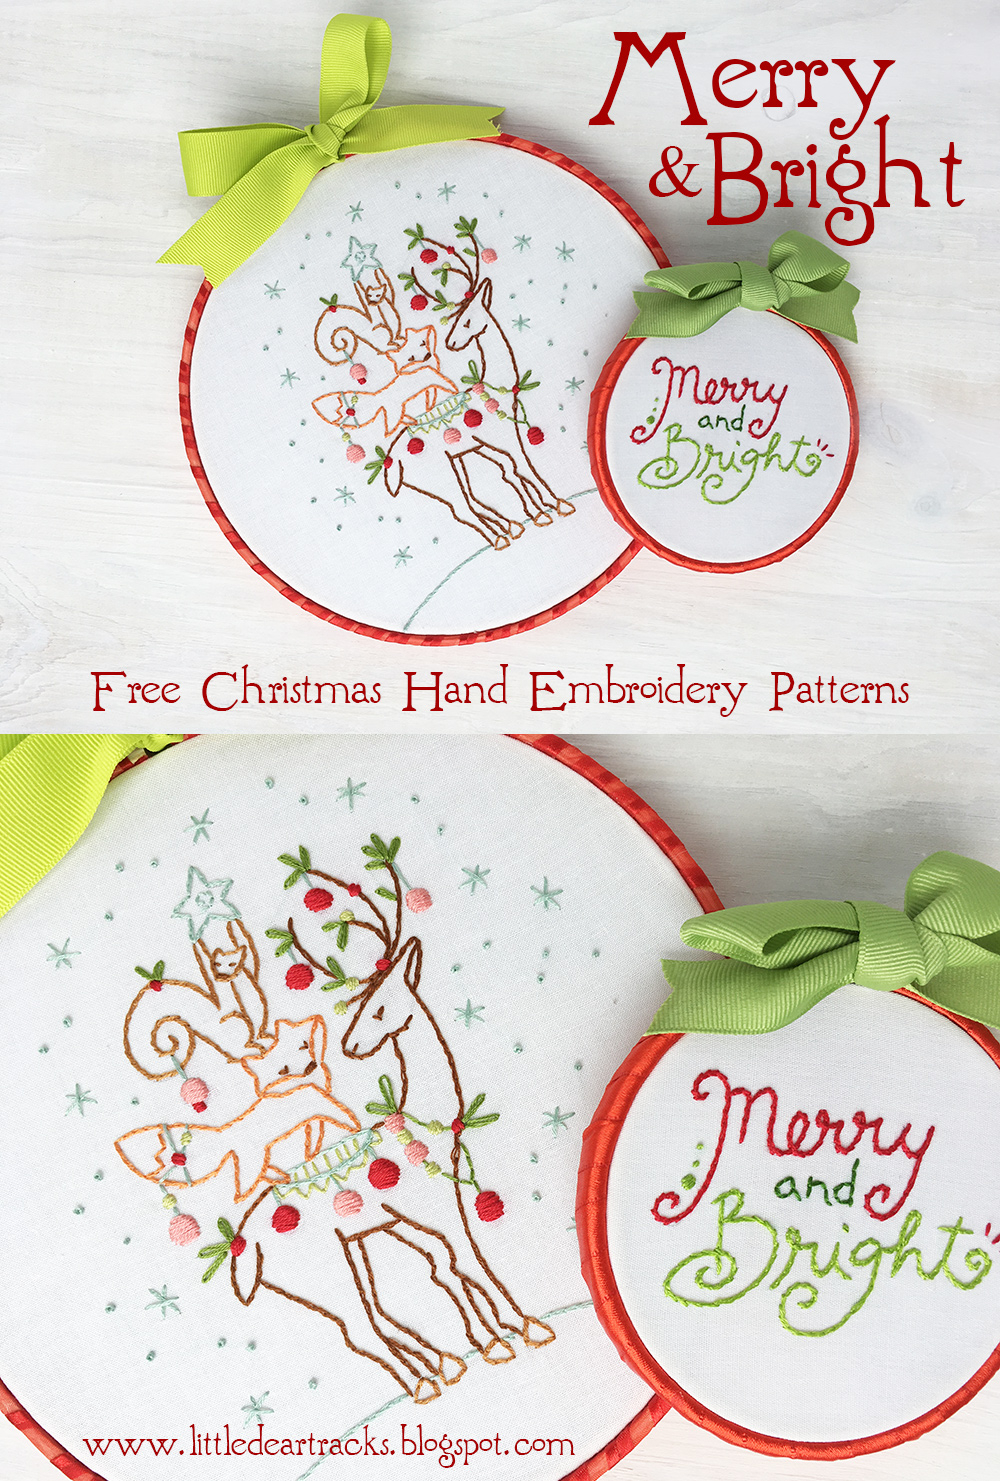 Embroidery Patterns Christmas Little Dear Tracks Free Christmas Embroidery Patterns